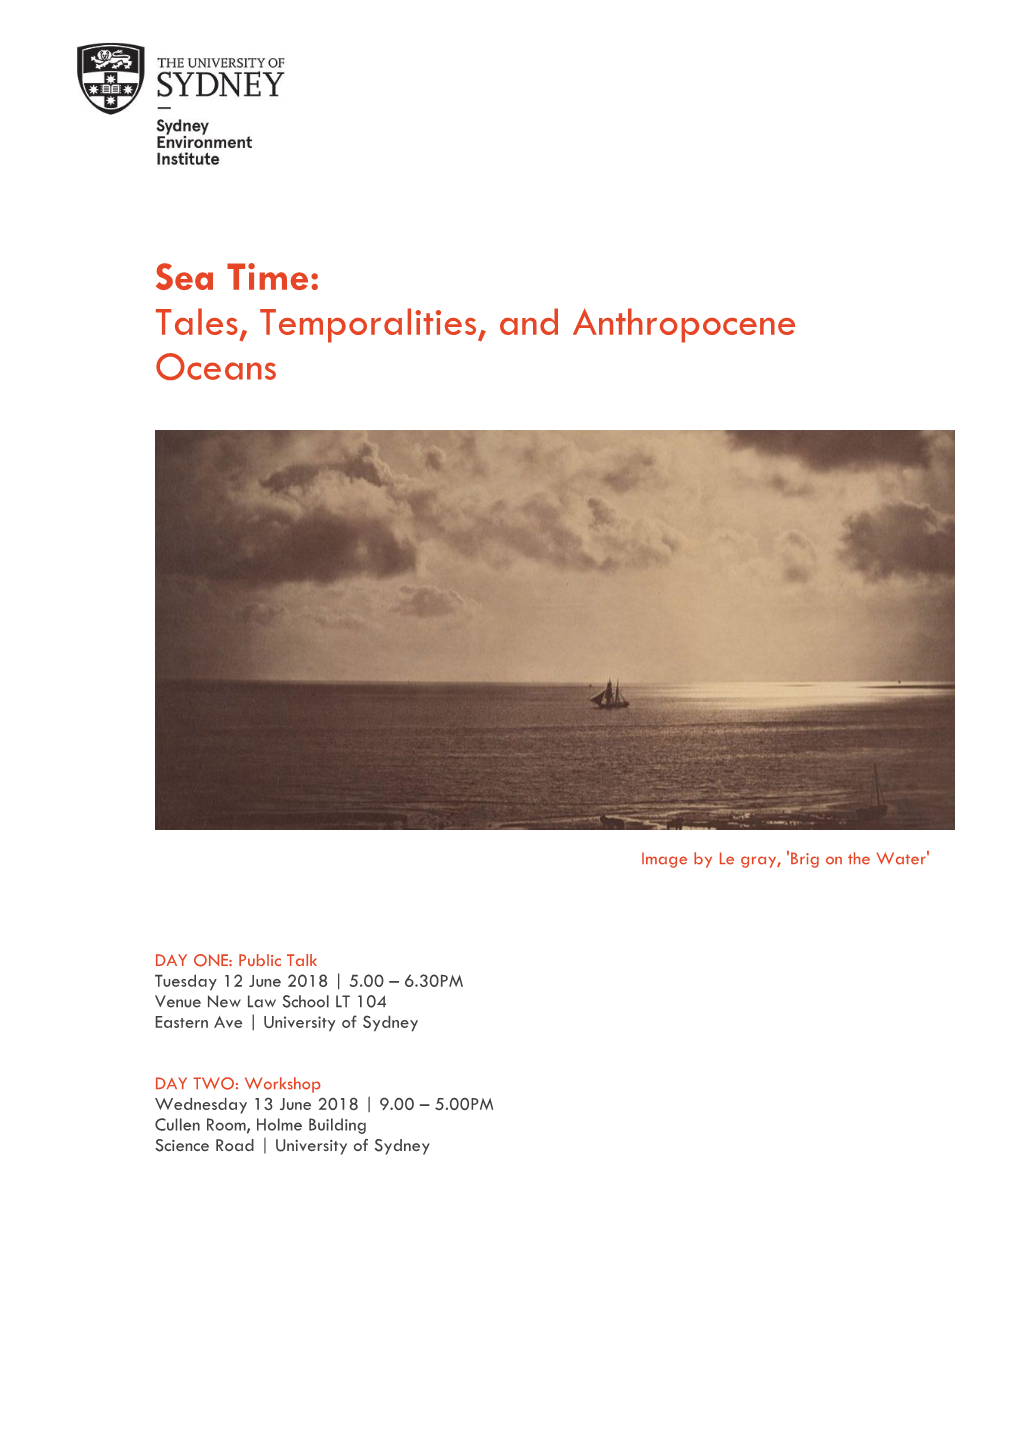 Sea Time: Tales, Temporalities, and Anthropocene Oceans